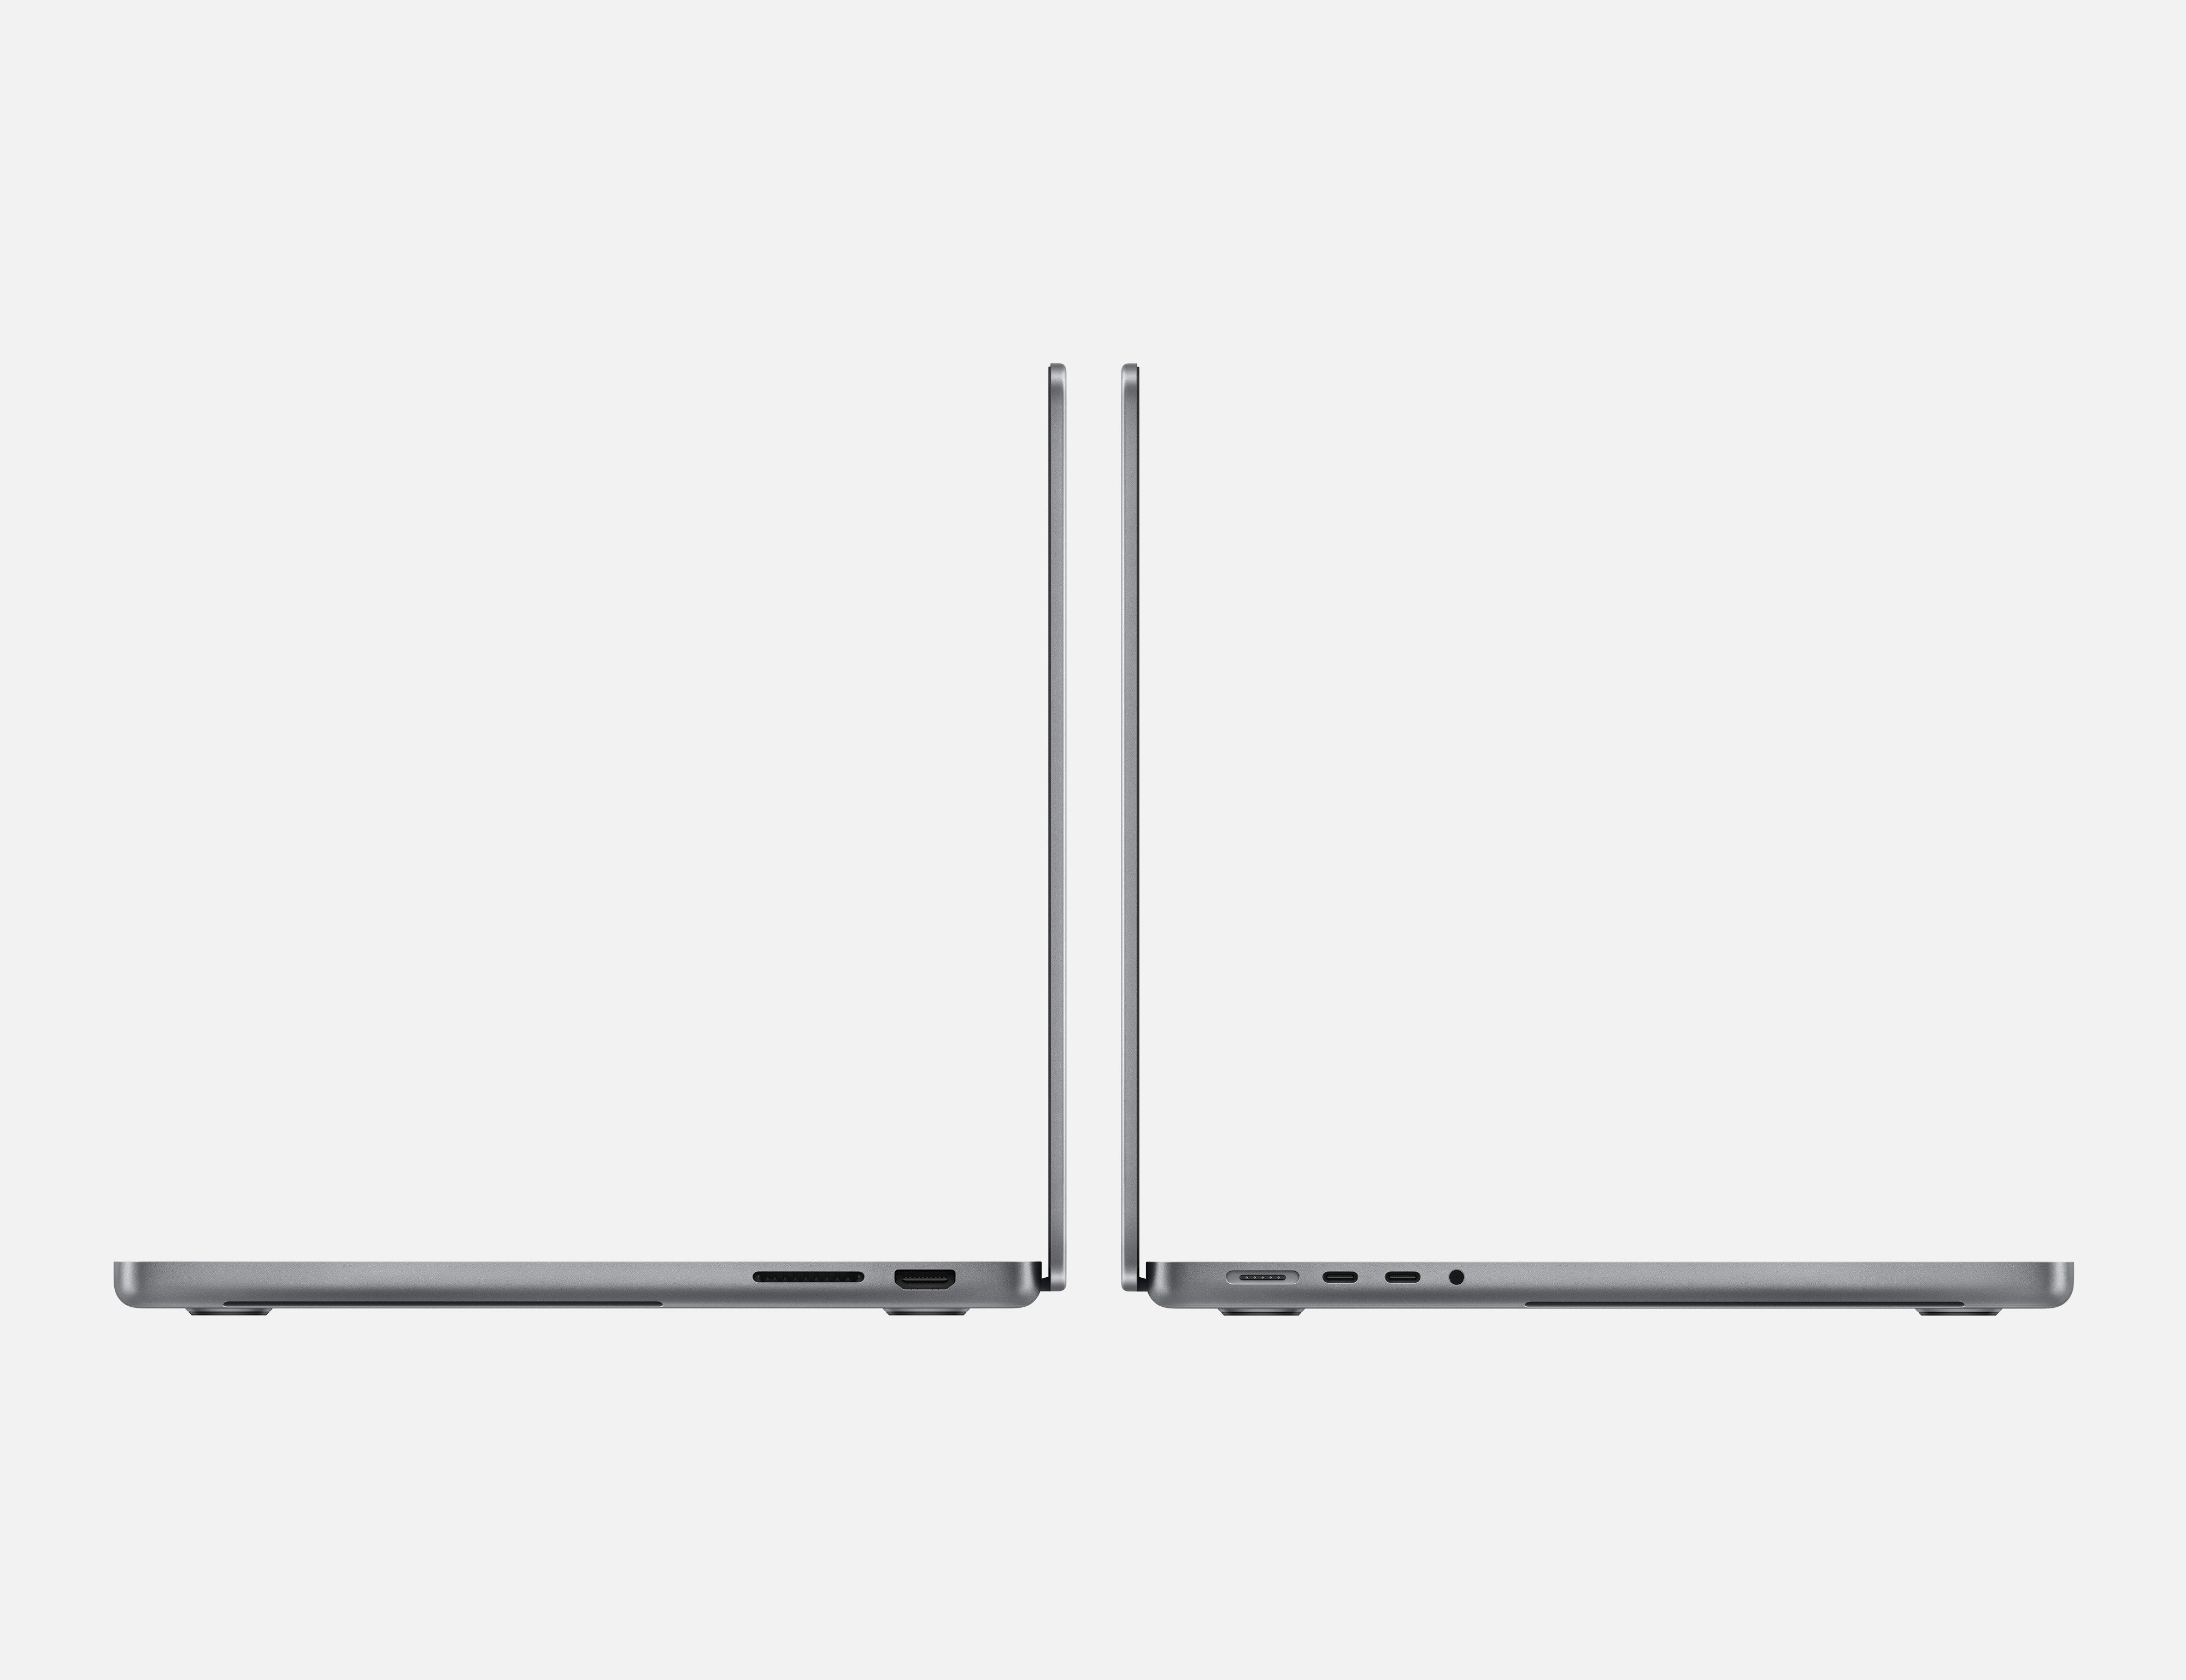 MTL73AB/A/Apple 14-inch MacBook Pro: Apple M3 chip with 8?core CPU and 10?core GPU, 512GB SSD - Spac 512 / 14 / M3 Chip